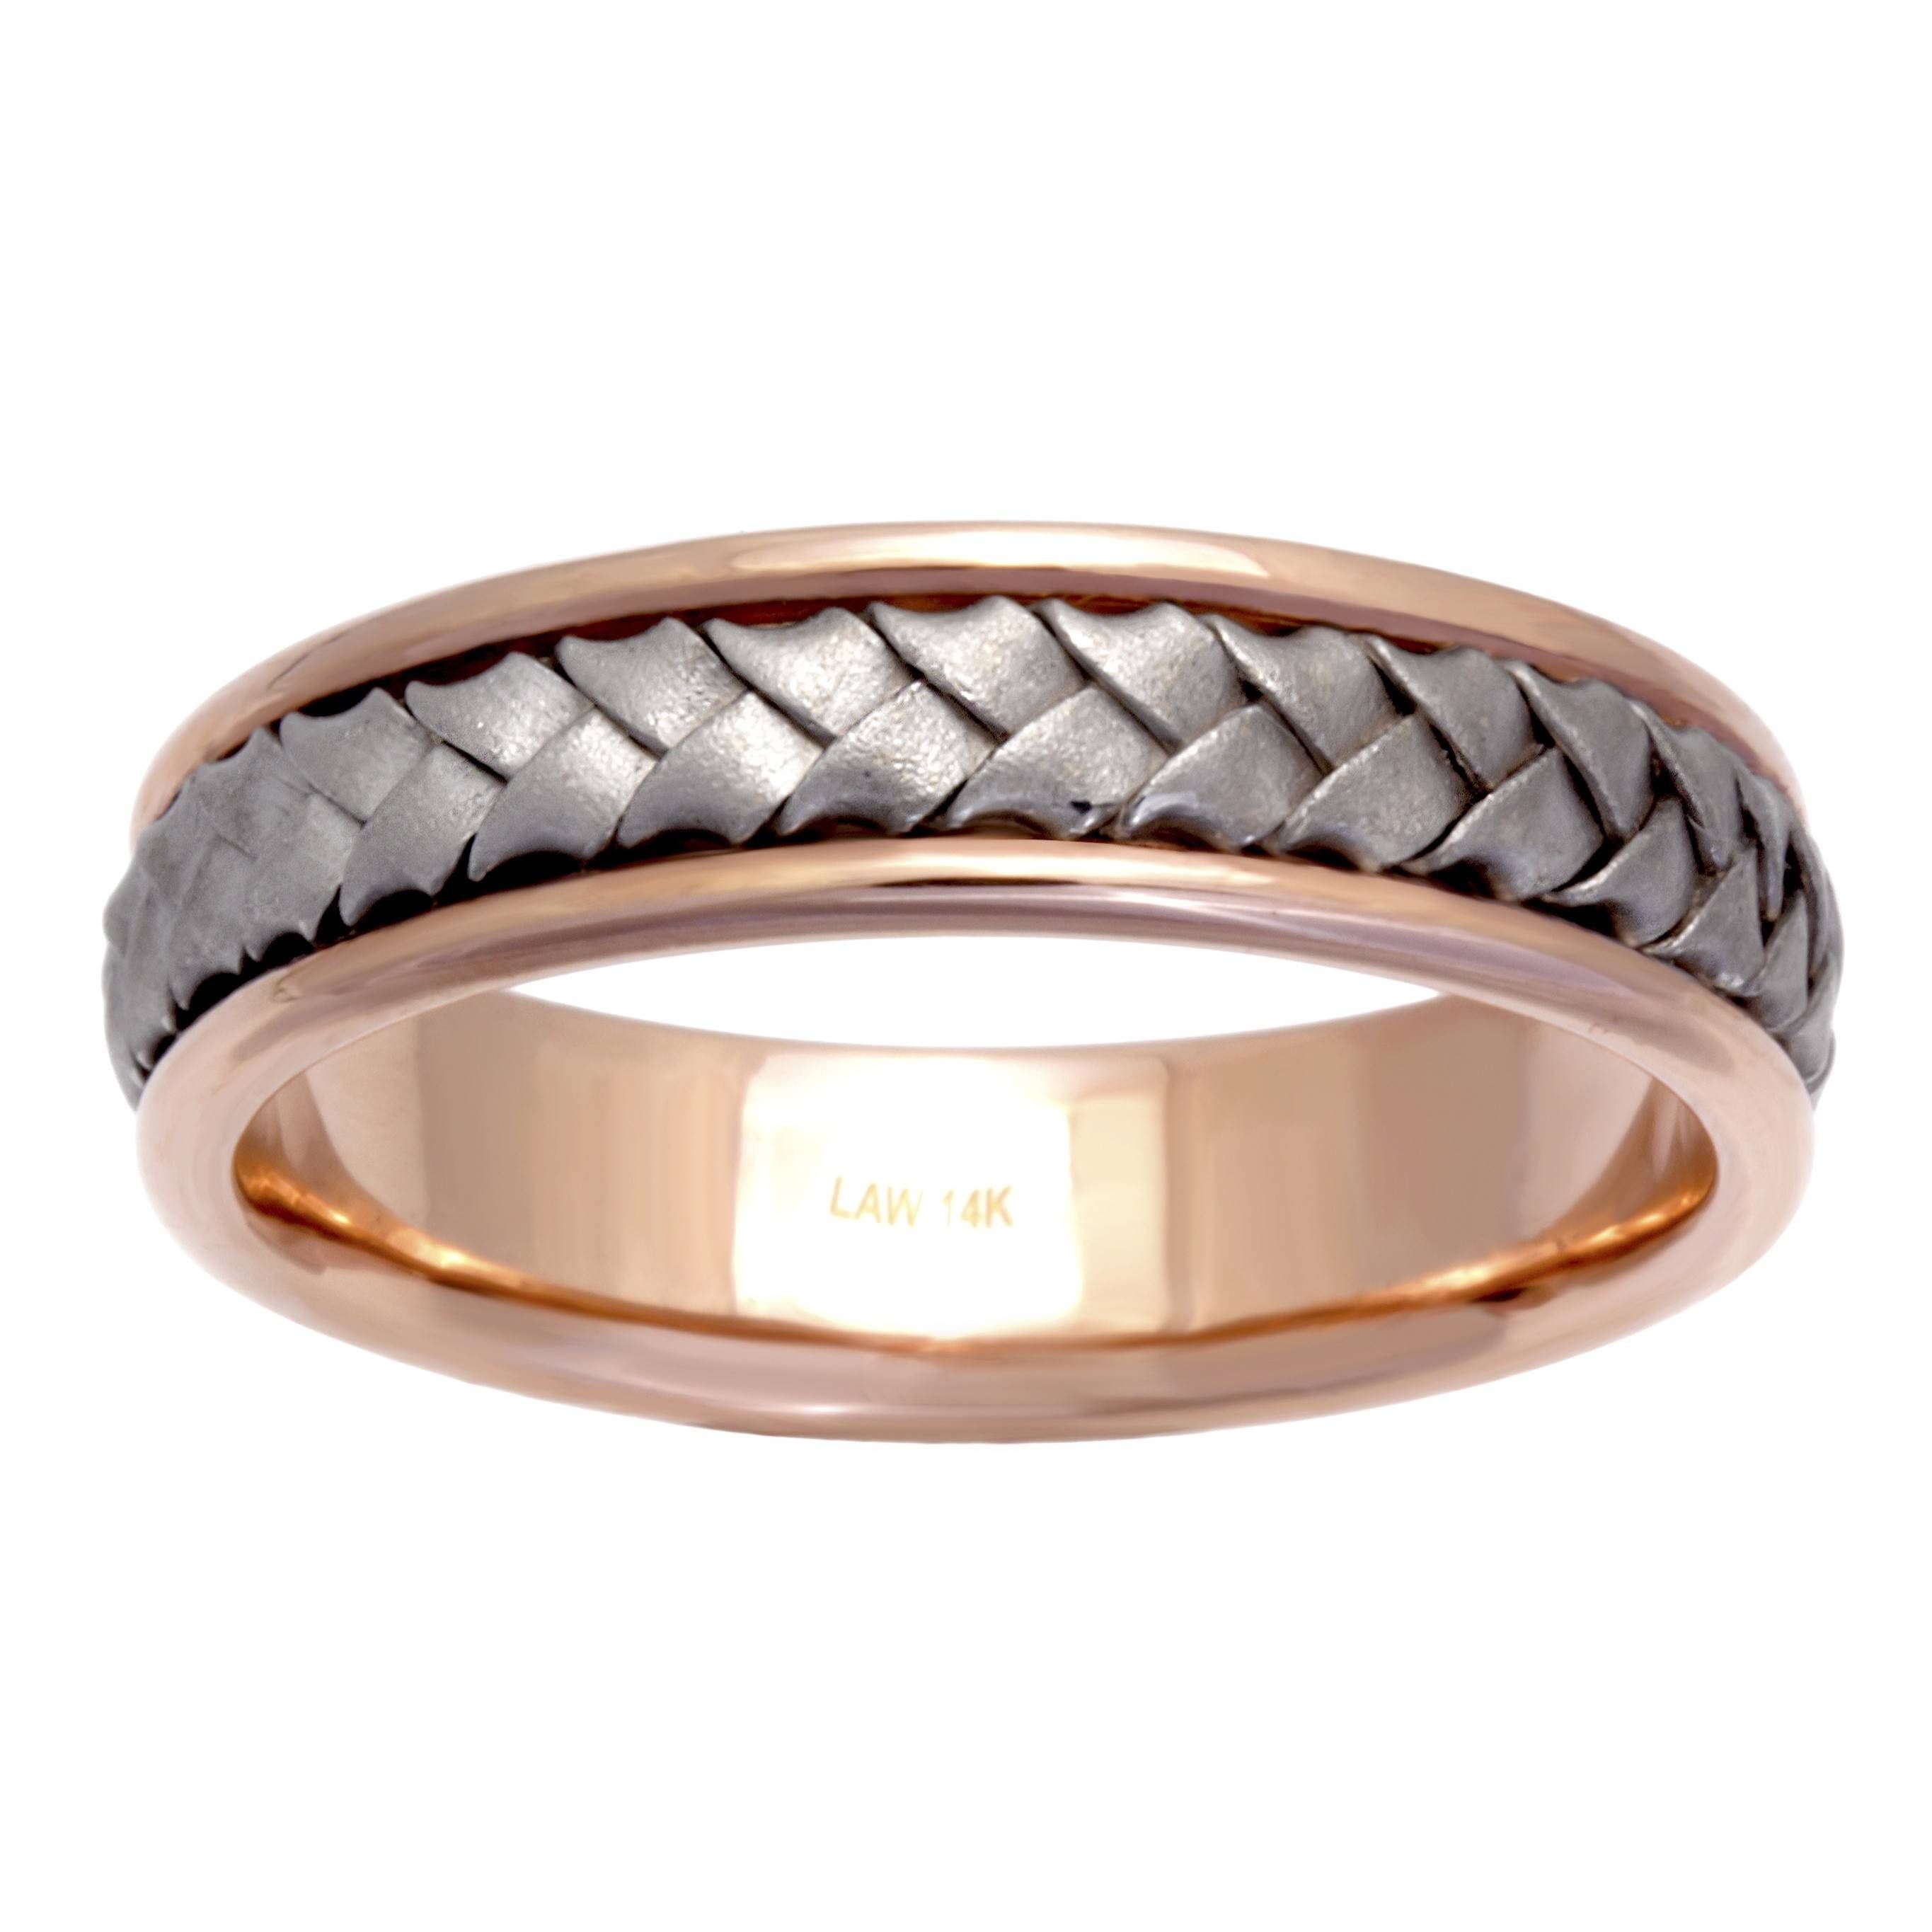 Scottish Wedding Rings For Men Fresh Mens Rustic Style Rose Gold Throughout Mens Scottish Wedding Bands (View 8 of 15)